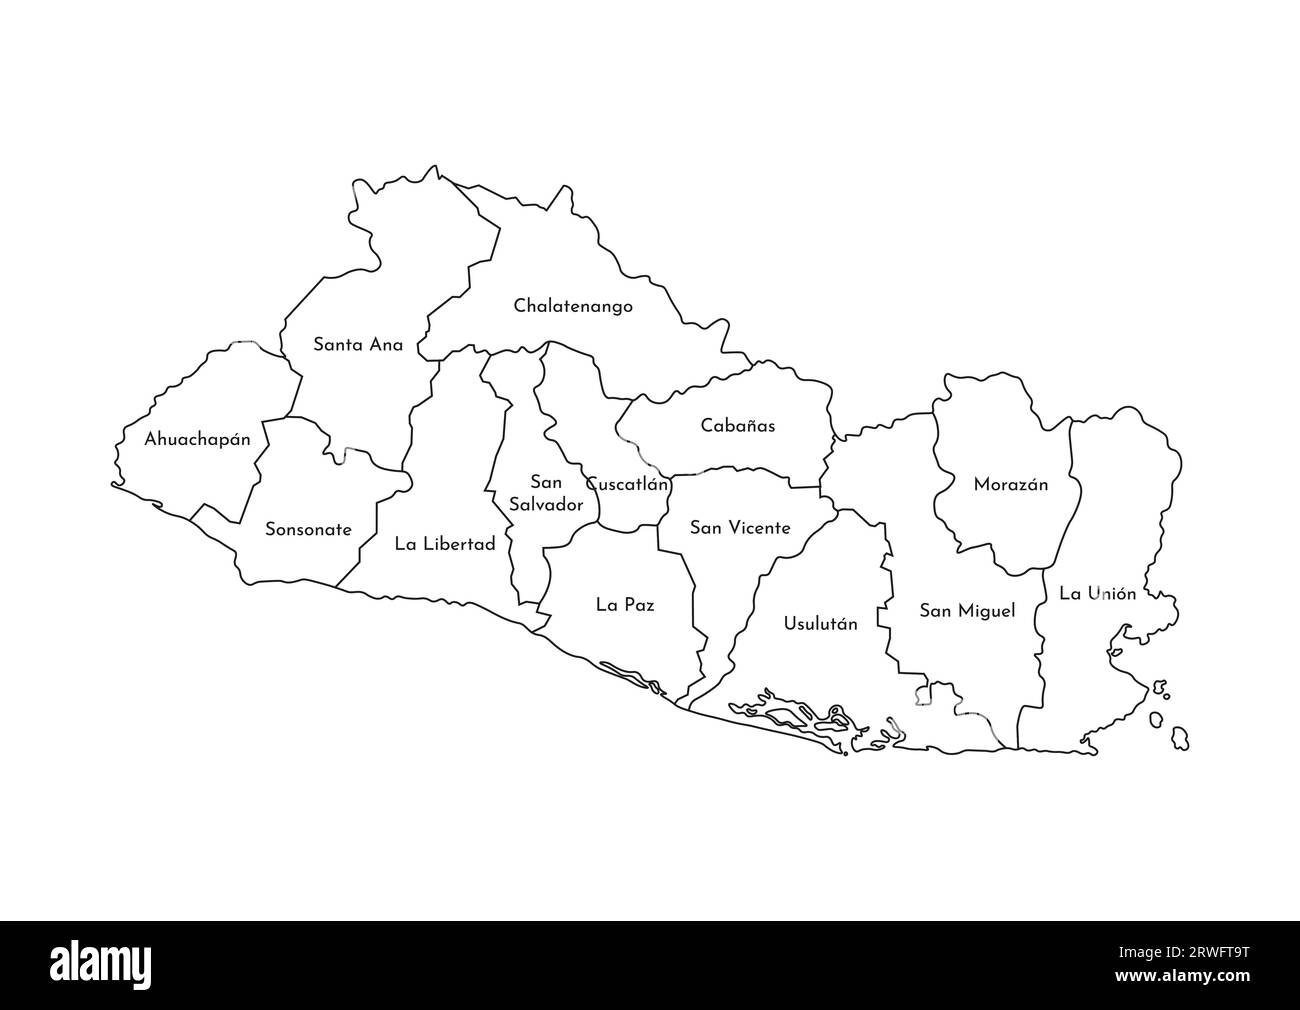 Vector isolated illustration of simplified administrative map of El Salvador. Borders and names of the departments (regions). Black line silhouettes. Stock Vector